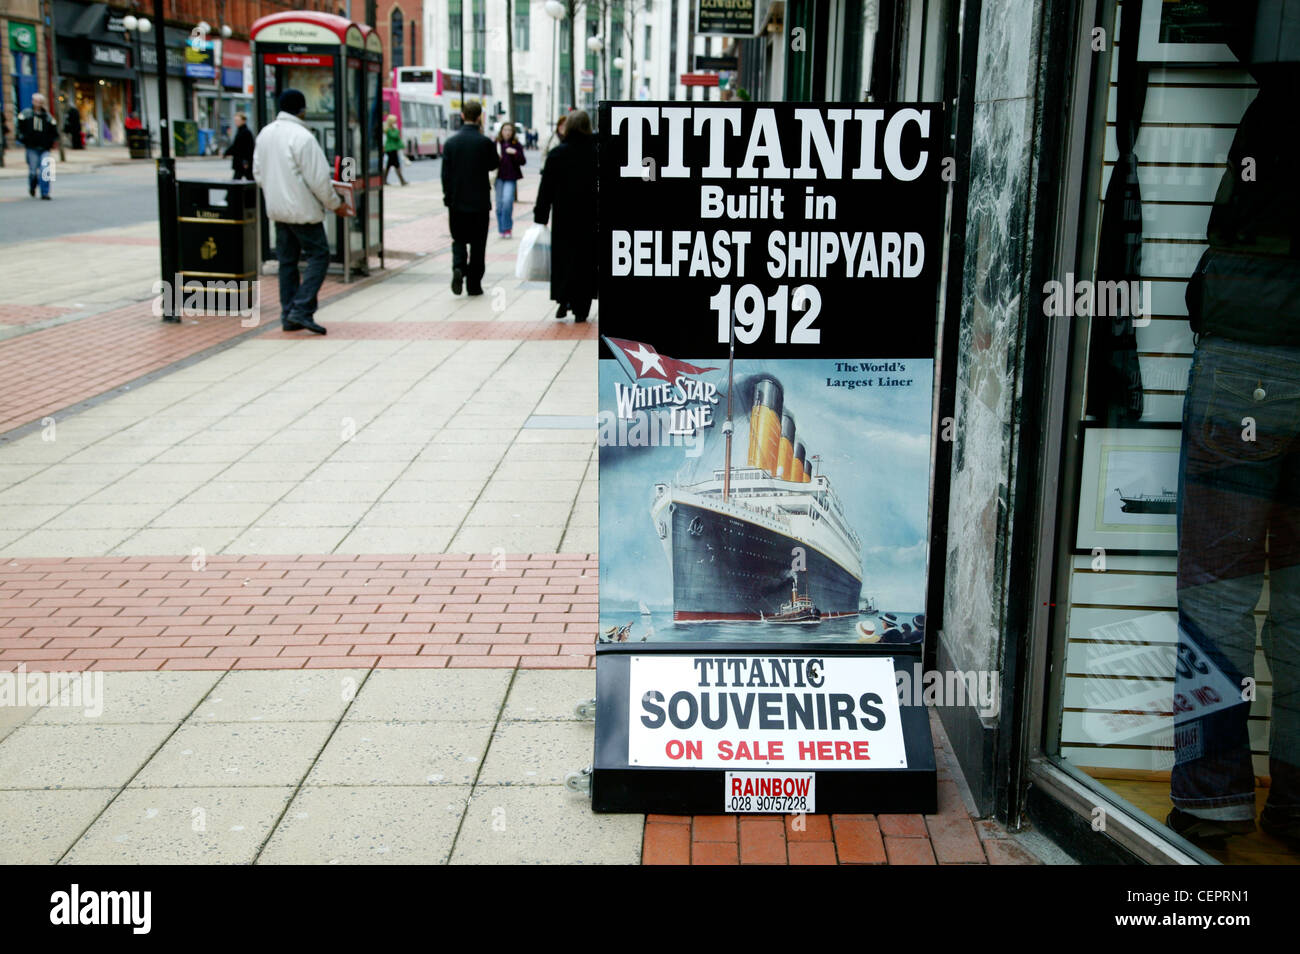 A Titanic souvenirs advert on the shopping streets of Belfast. Stock Photo